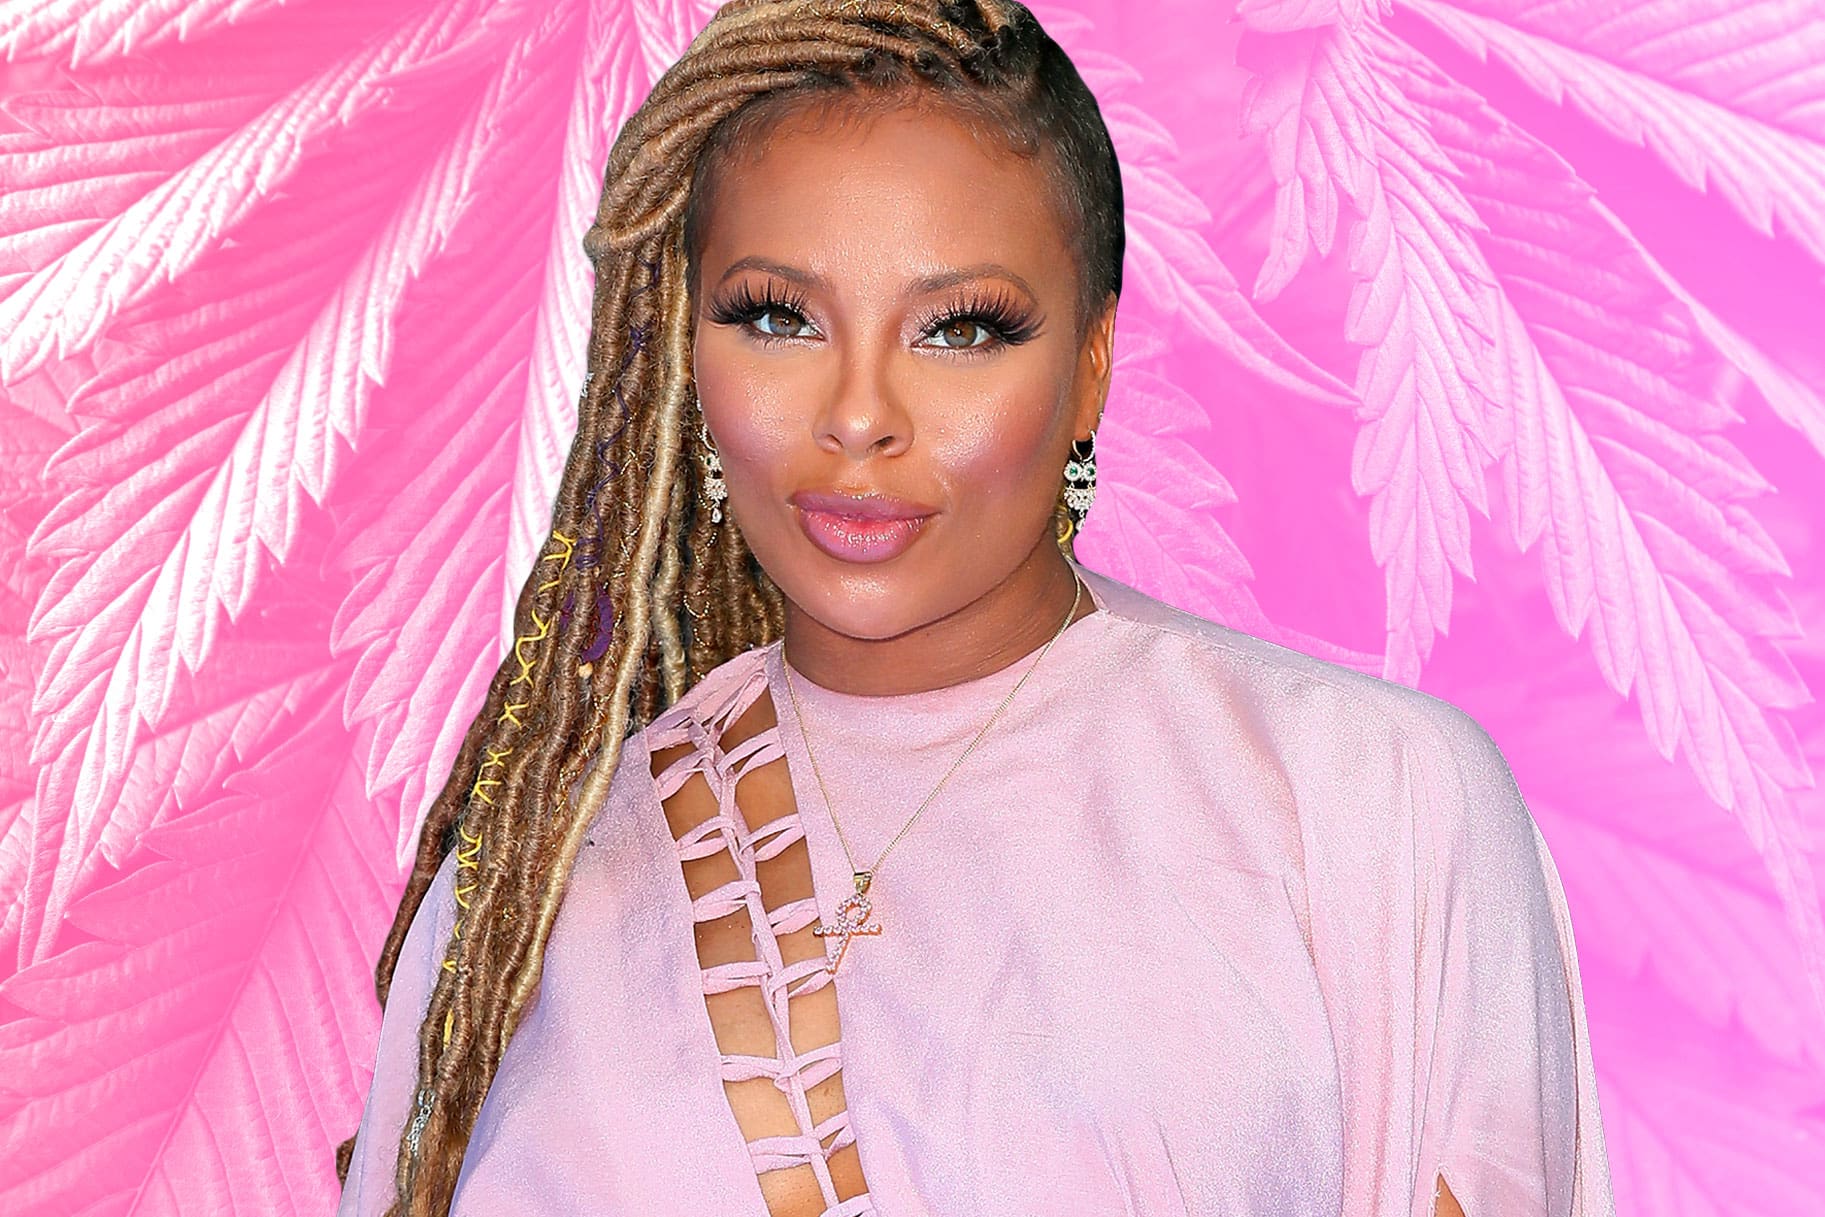 Eva Marcille Reveals A New Collaboration For Her fans - Check Out The New Project